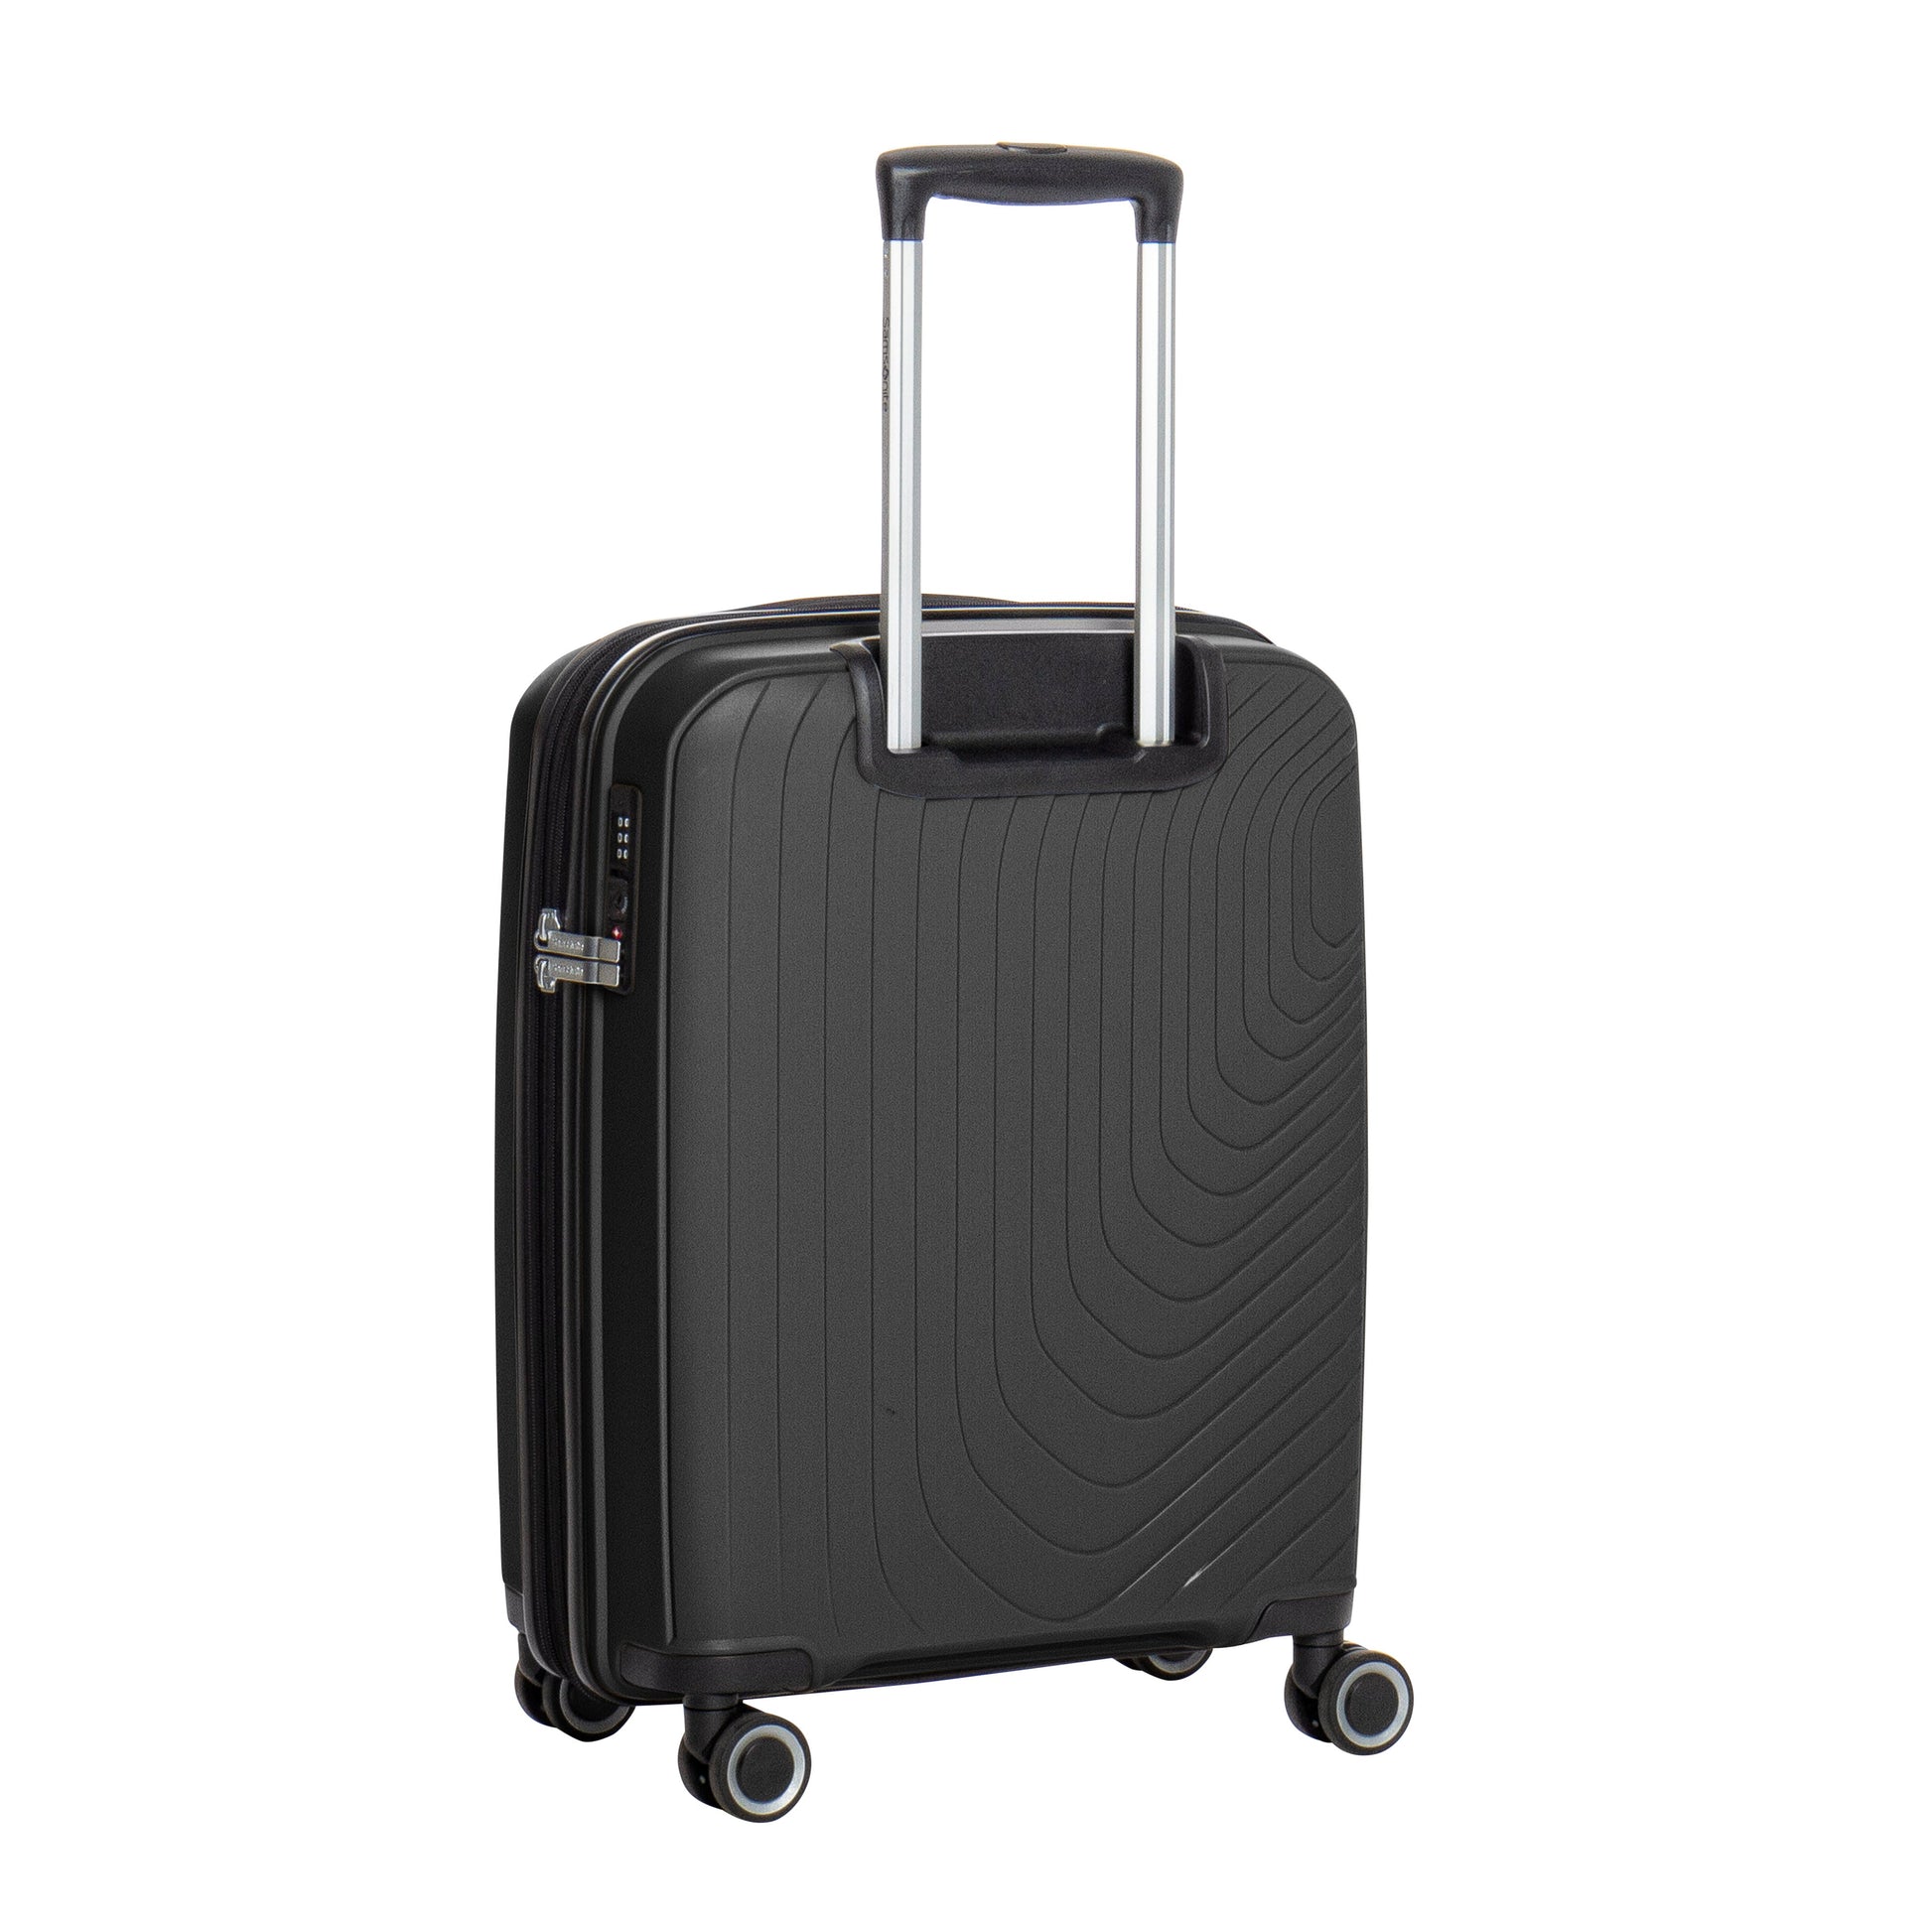 Samsonite Arrival NXT Spinner Expandable 3-Piece Luggage Set